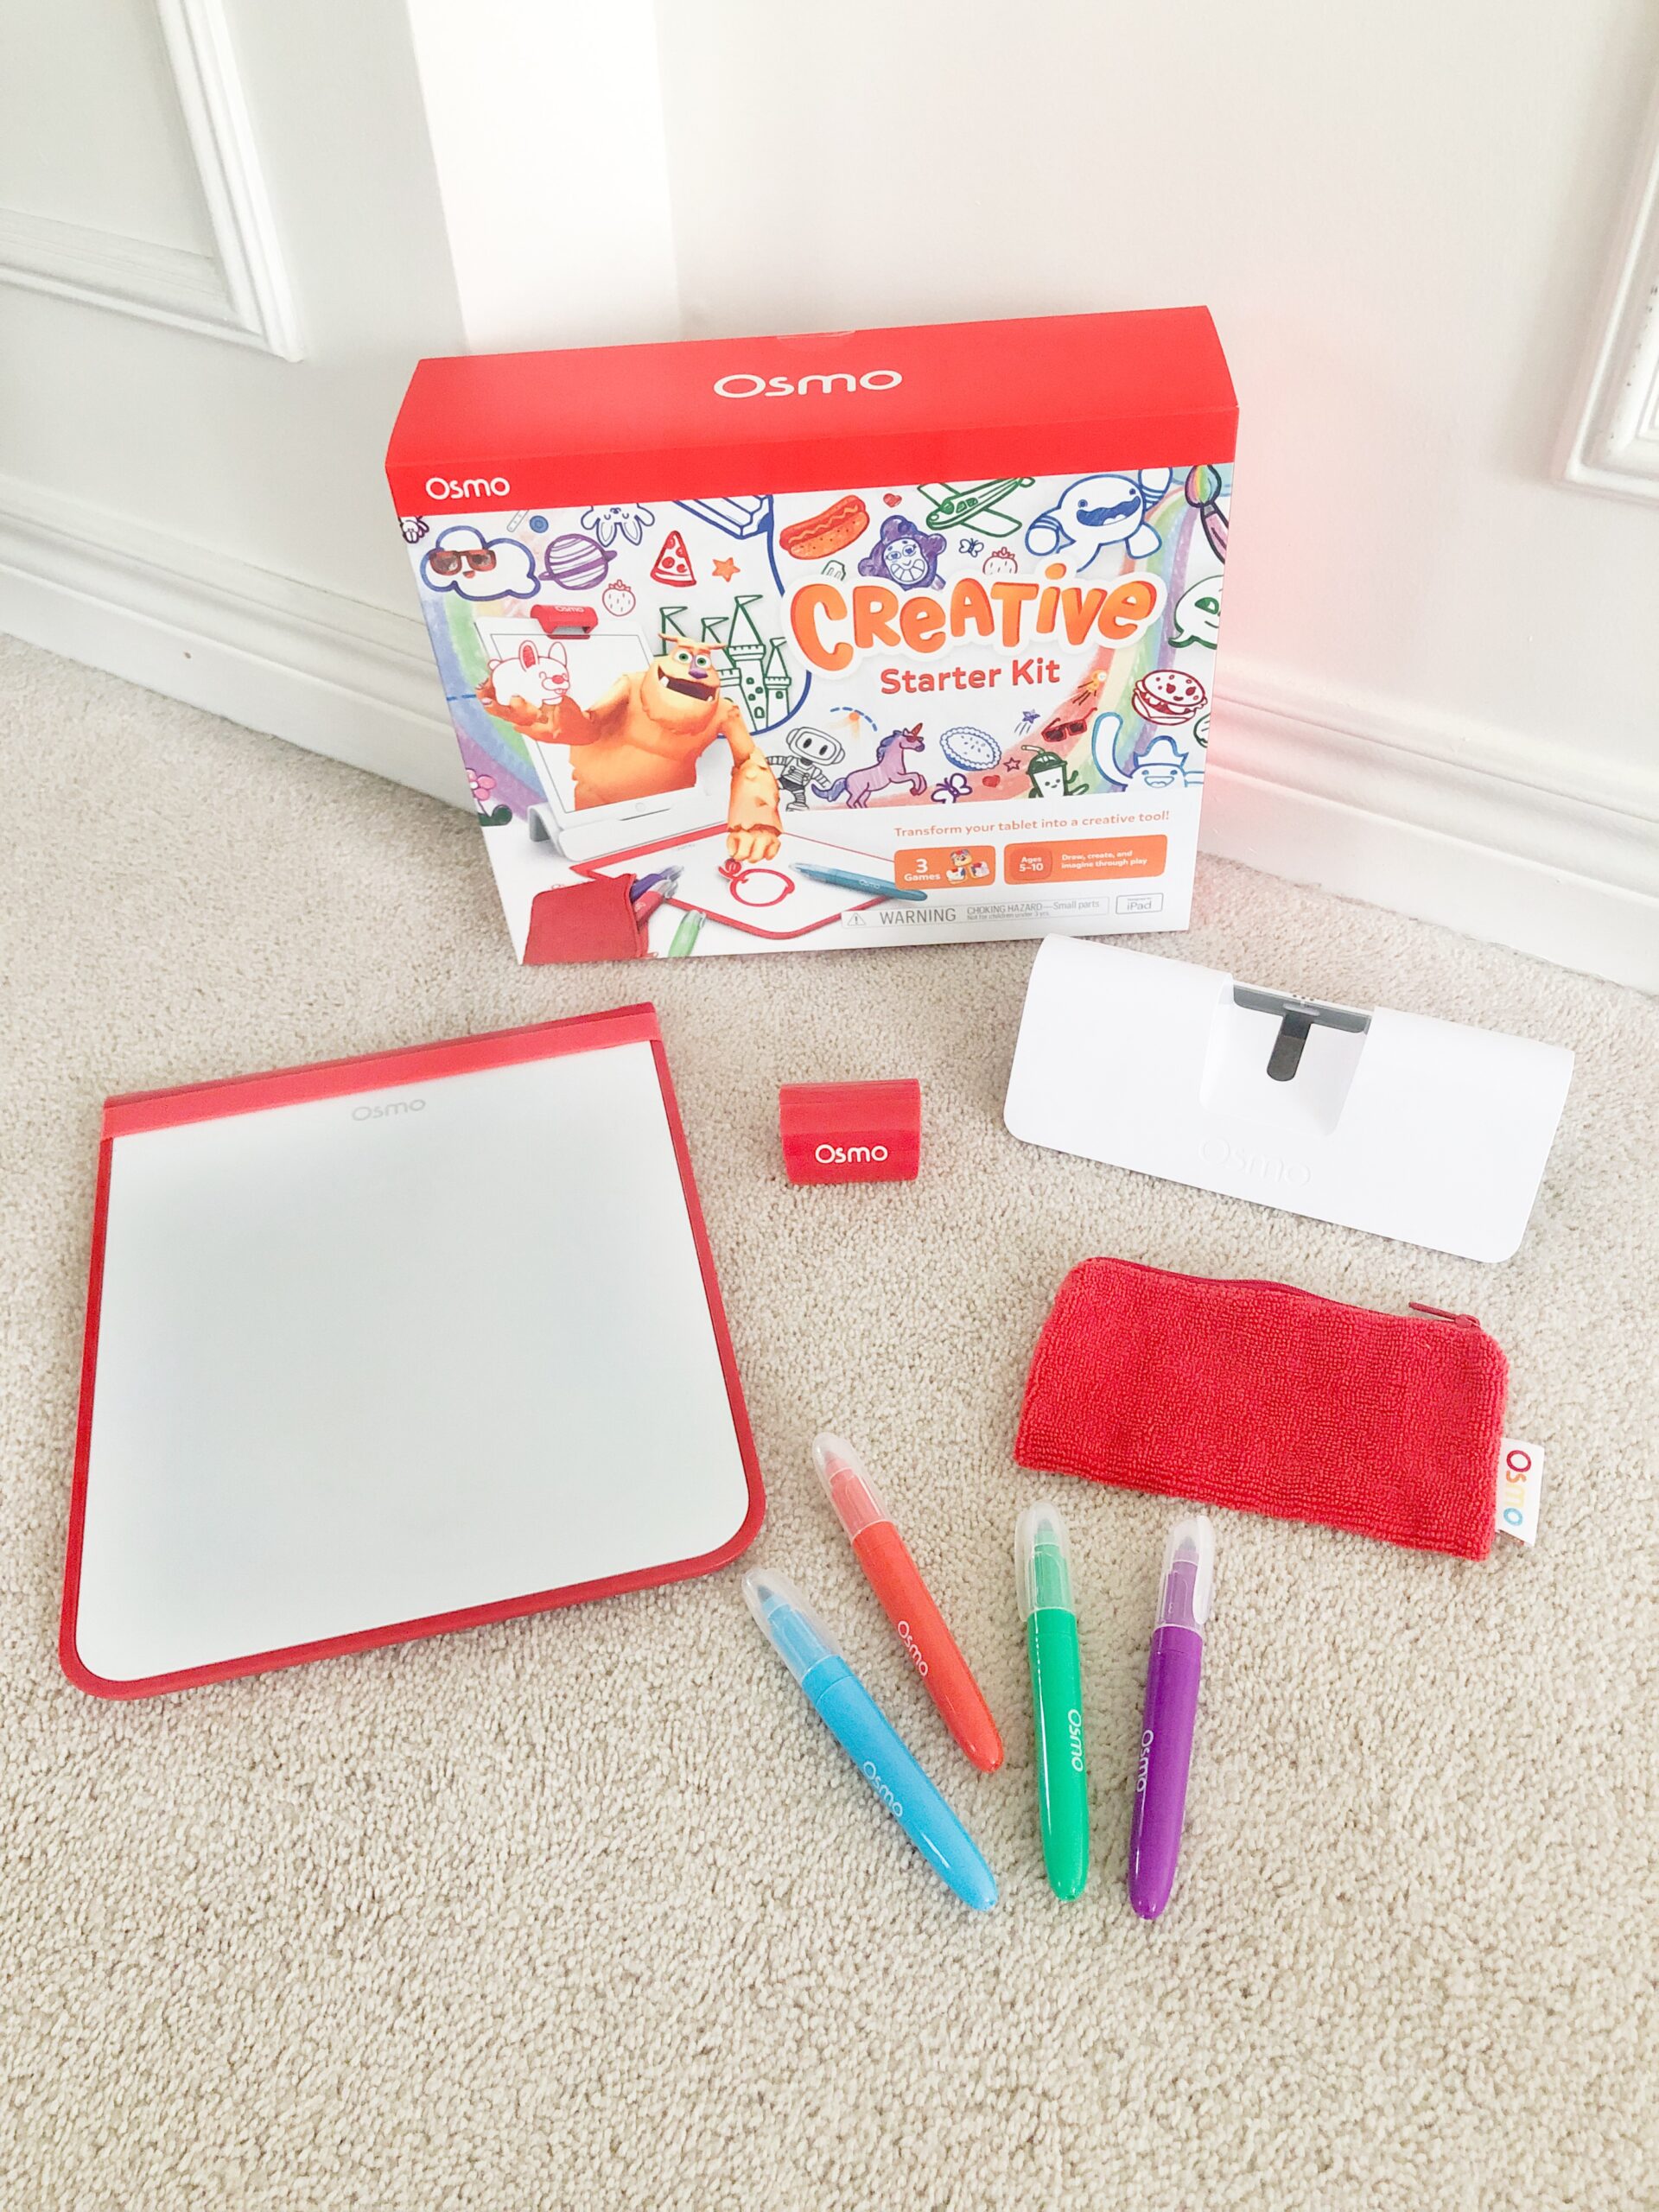 Osmo Creative Starter Kit (Monster) Review On Livin' Life with Style 